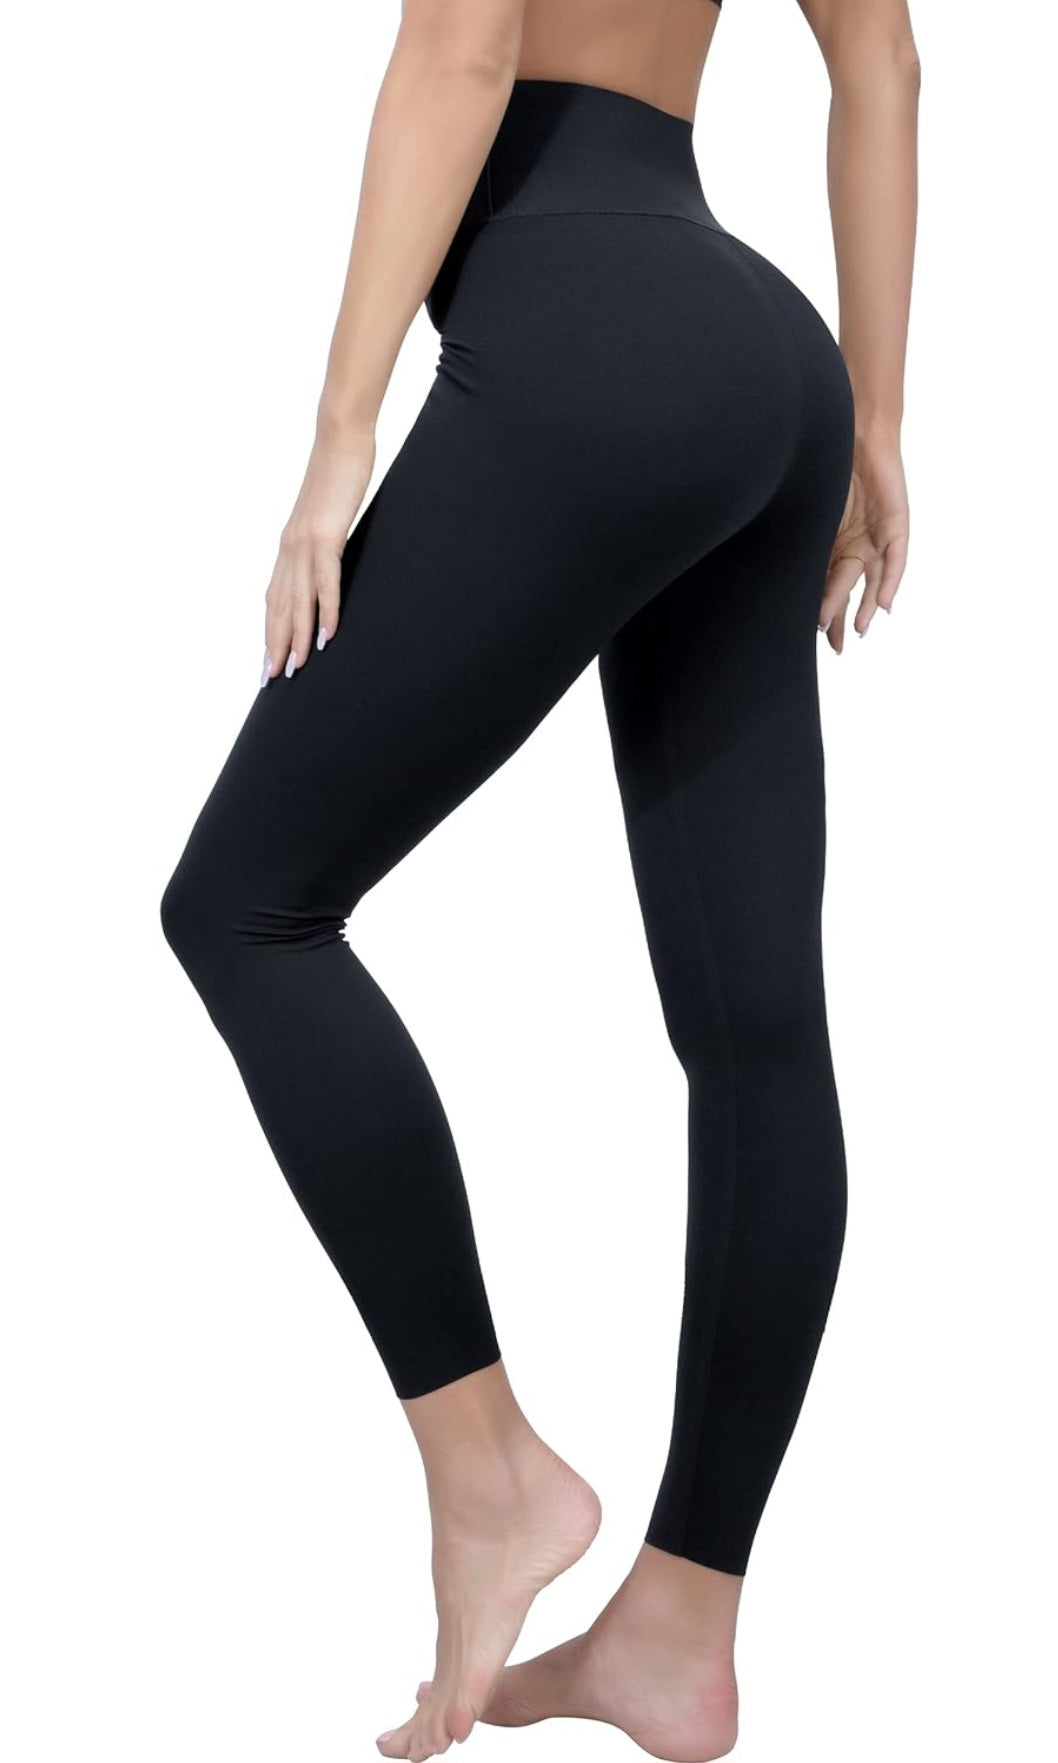 Buy Blisset High Waisted Leggings for Women - Soft Athletic Tummy Control  Pants for Running Cycling Yoga Workout (Black/Dark Grey/Rosy Brown,  Large-X-Large) at